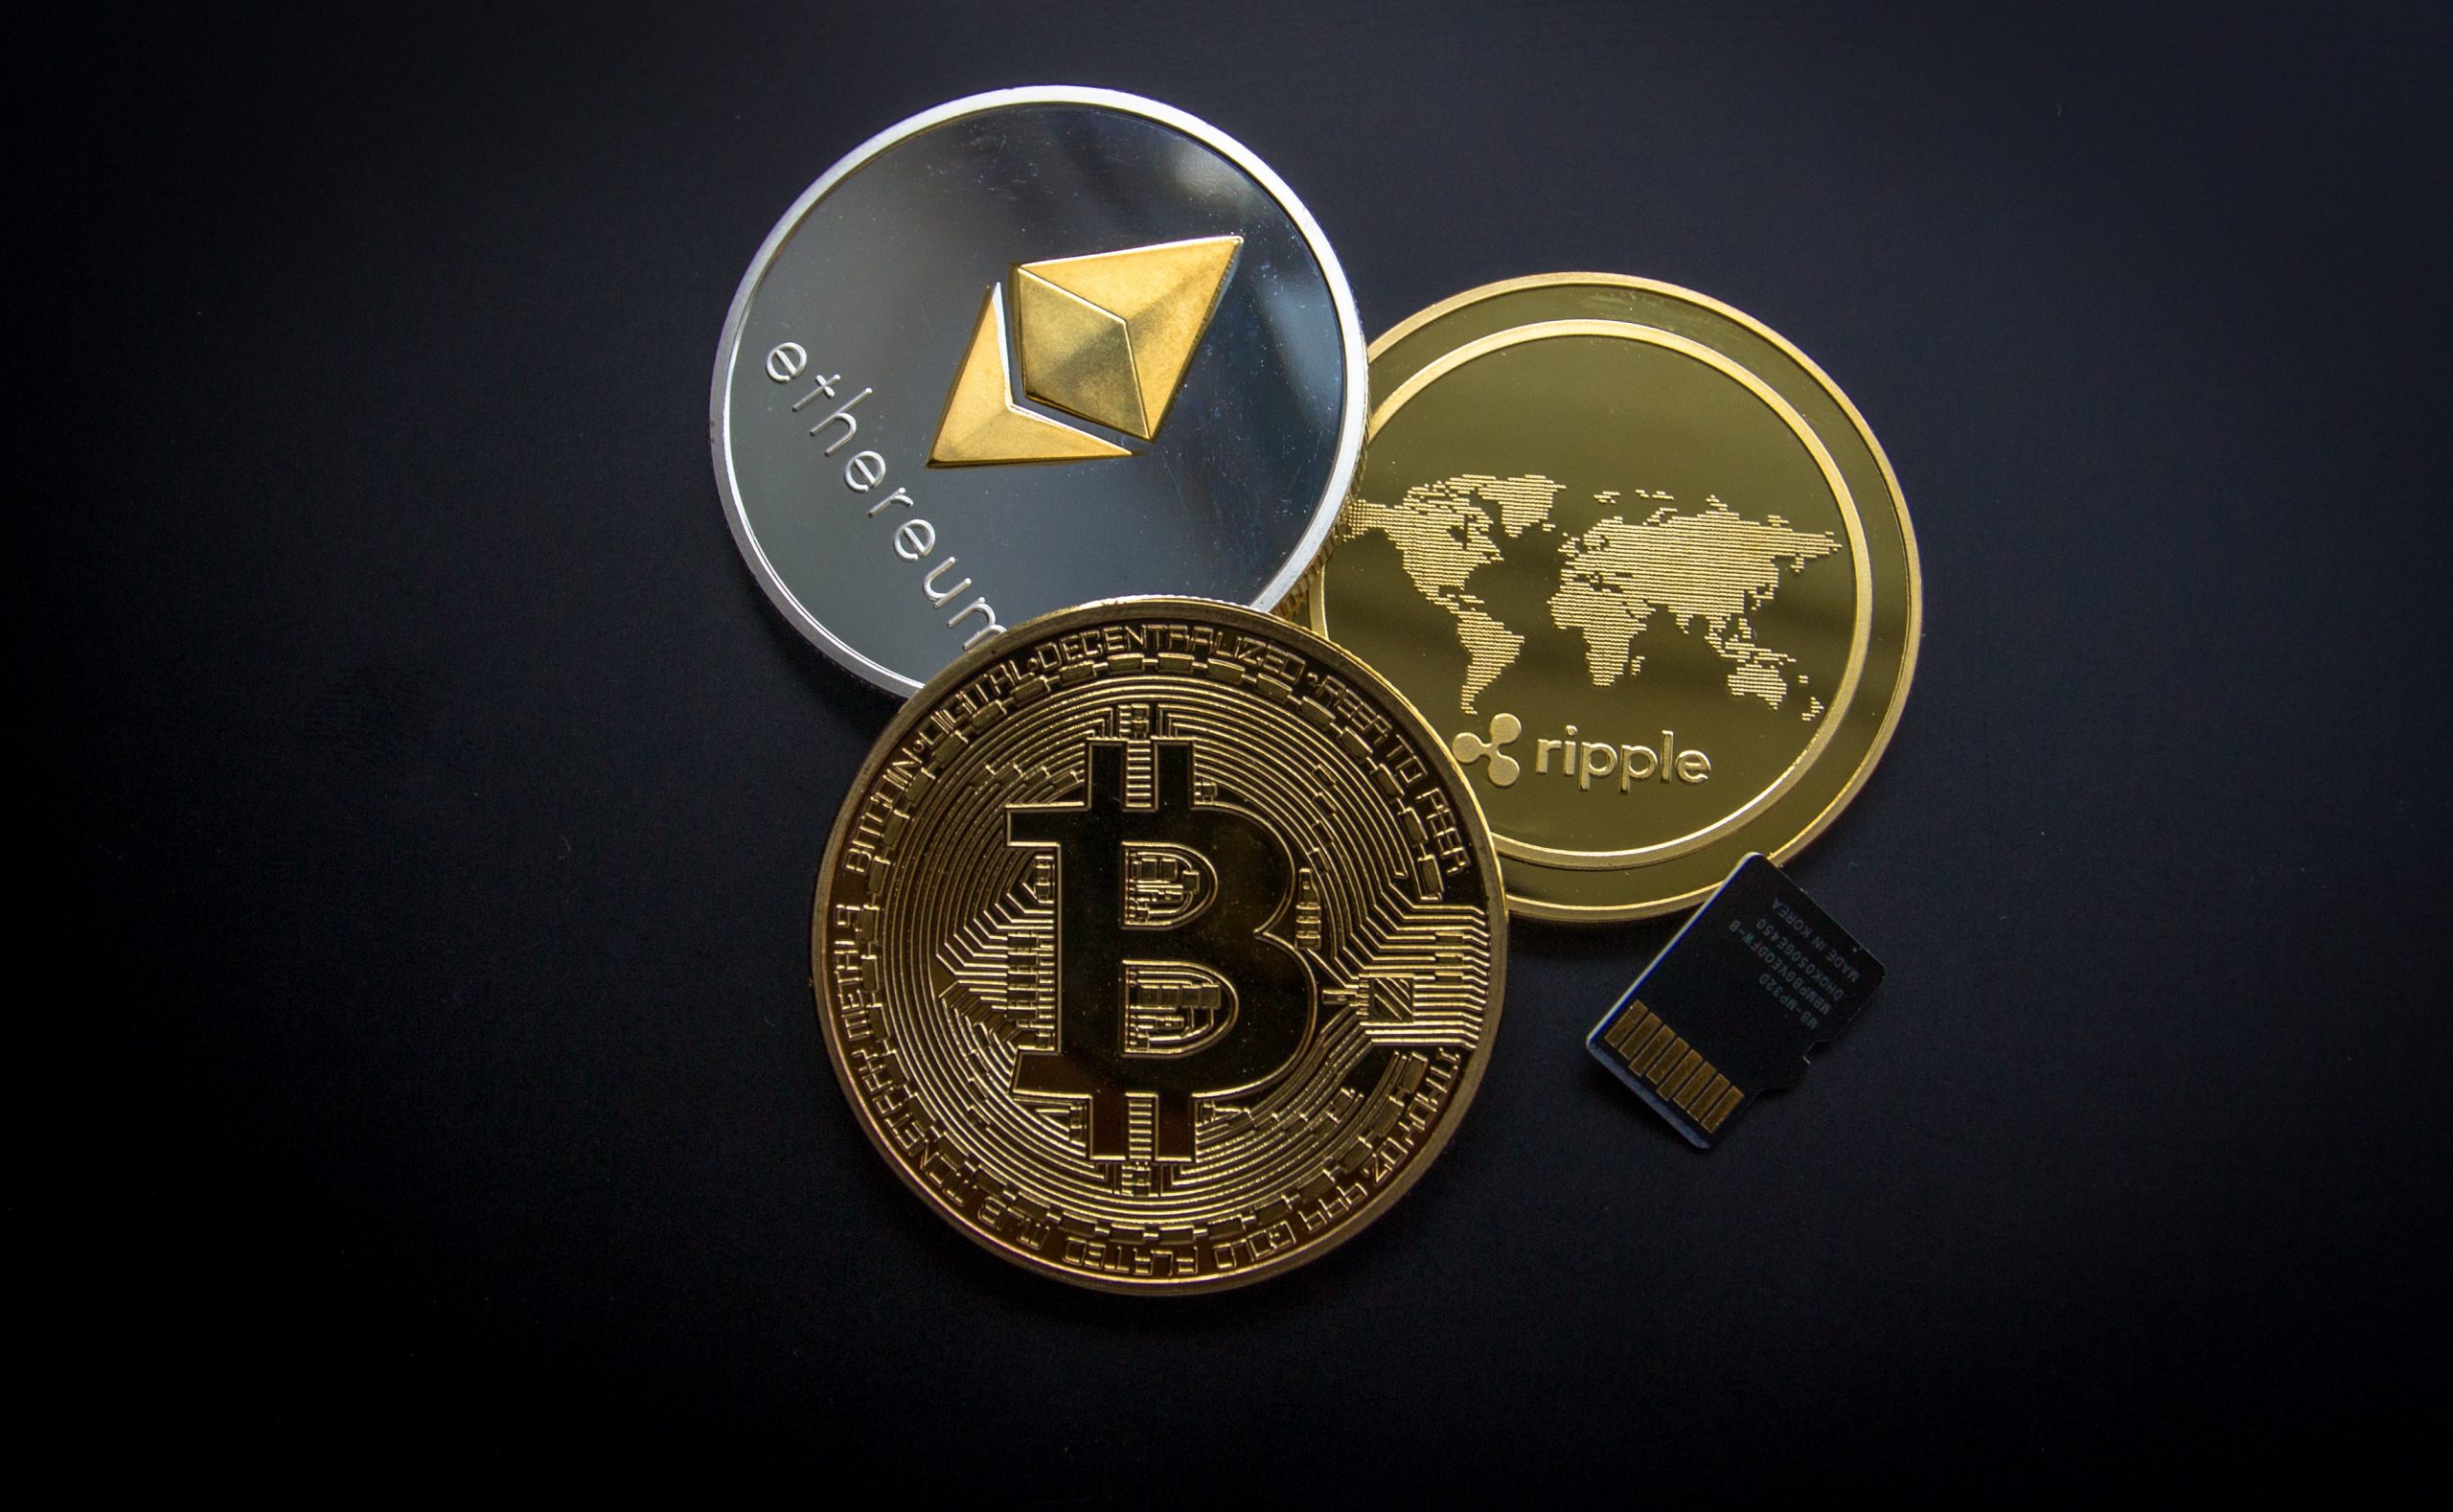 Ripple, Ethereum, Bitcoin and micro-SDHC card.